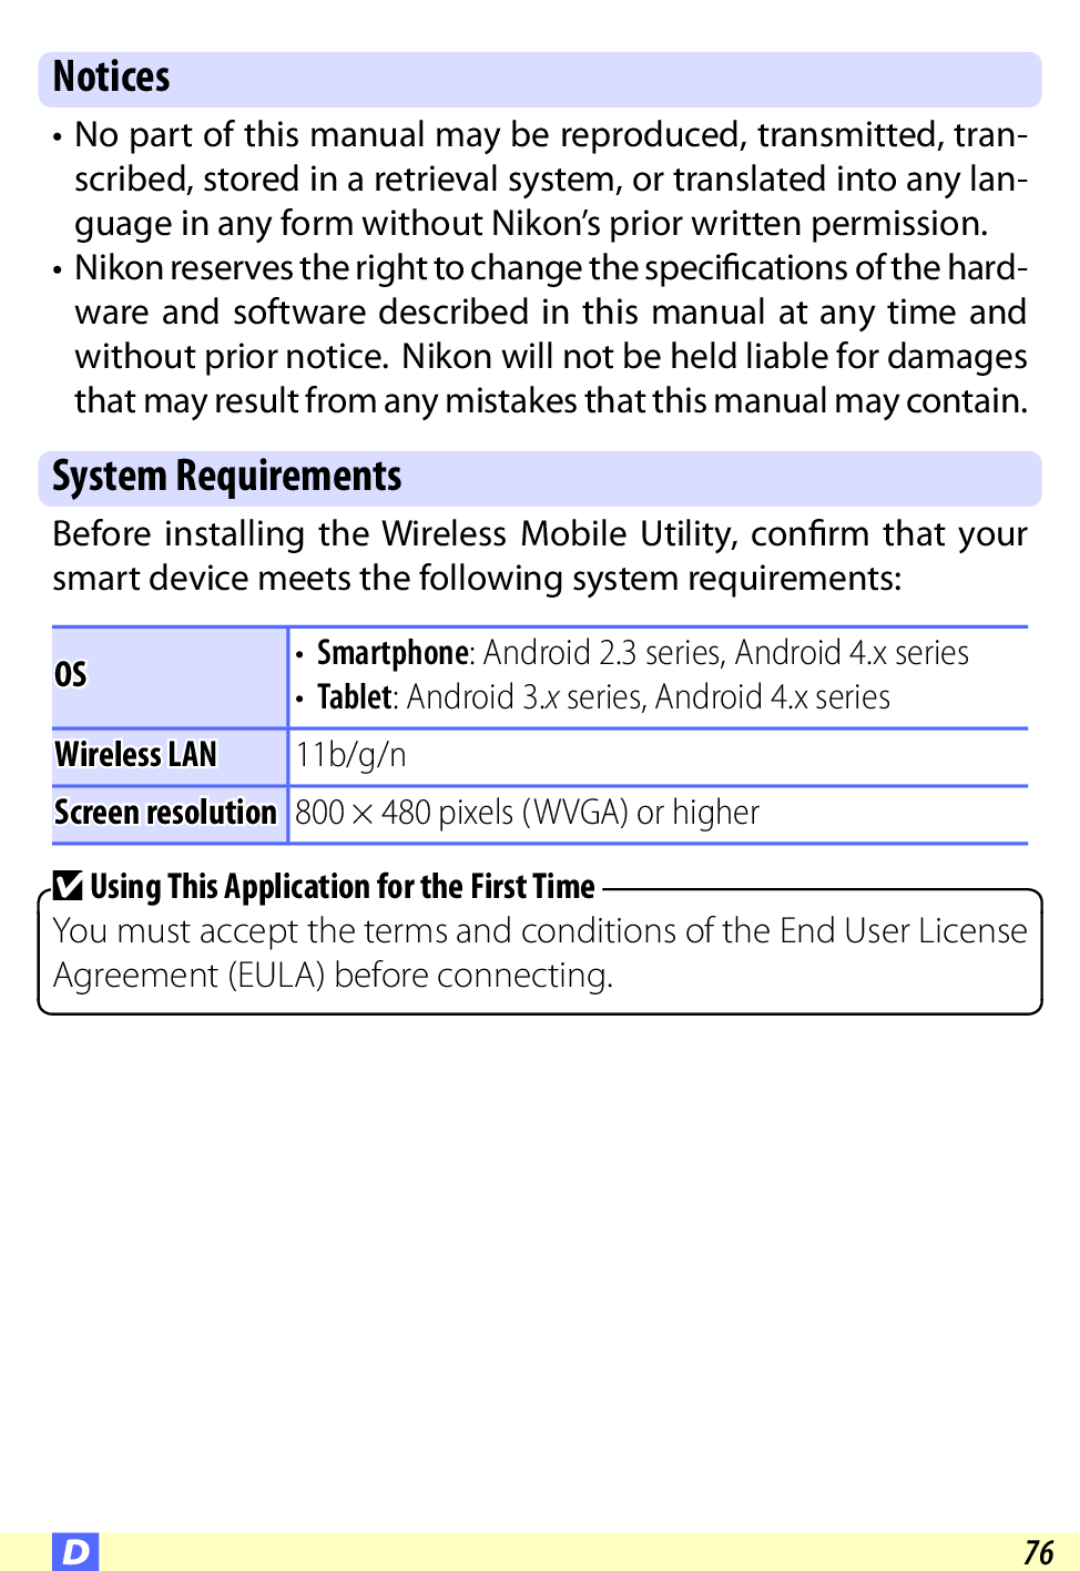 Nikon D600 user manual Notices, System Requirements, 11b/g/n, 800 × 480 pixels WVGA or higher, Wireless LAN 